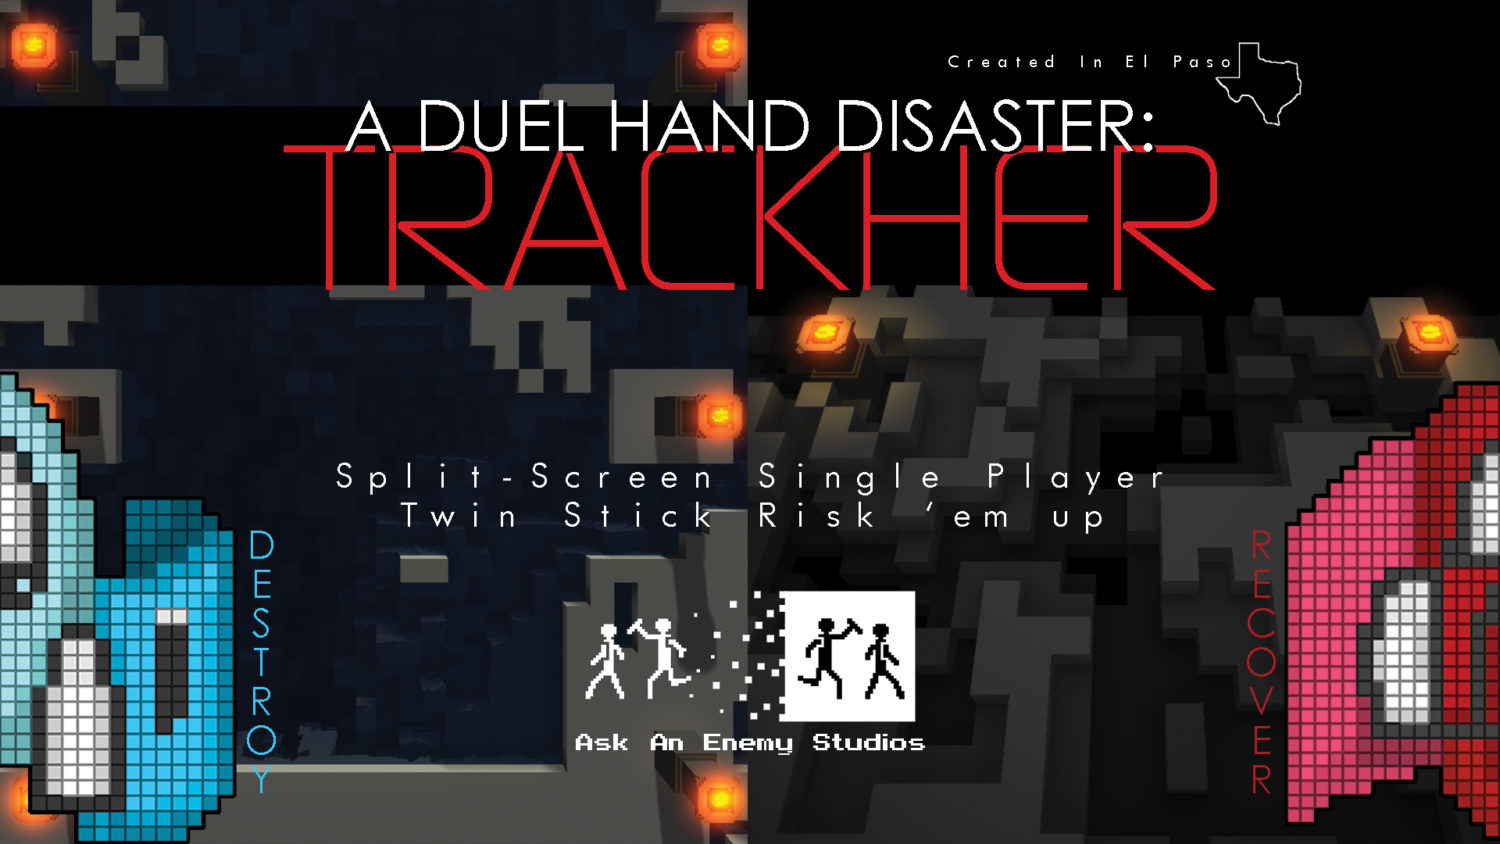 A Duel Hand Disaster Trackher